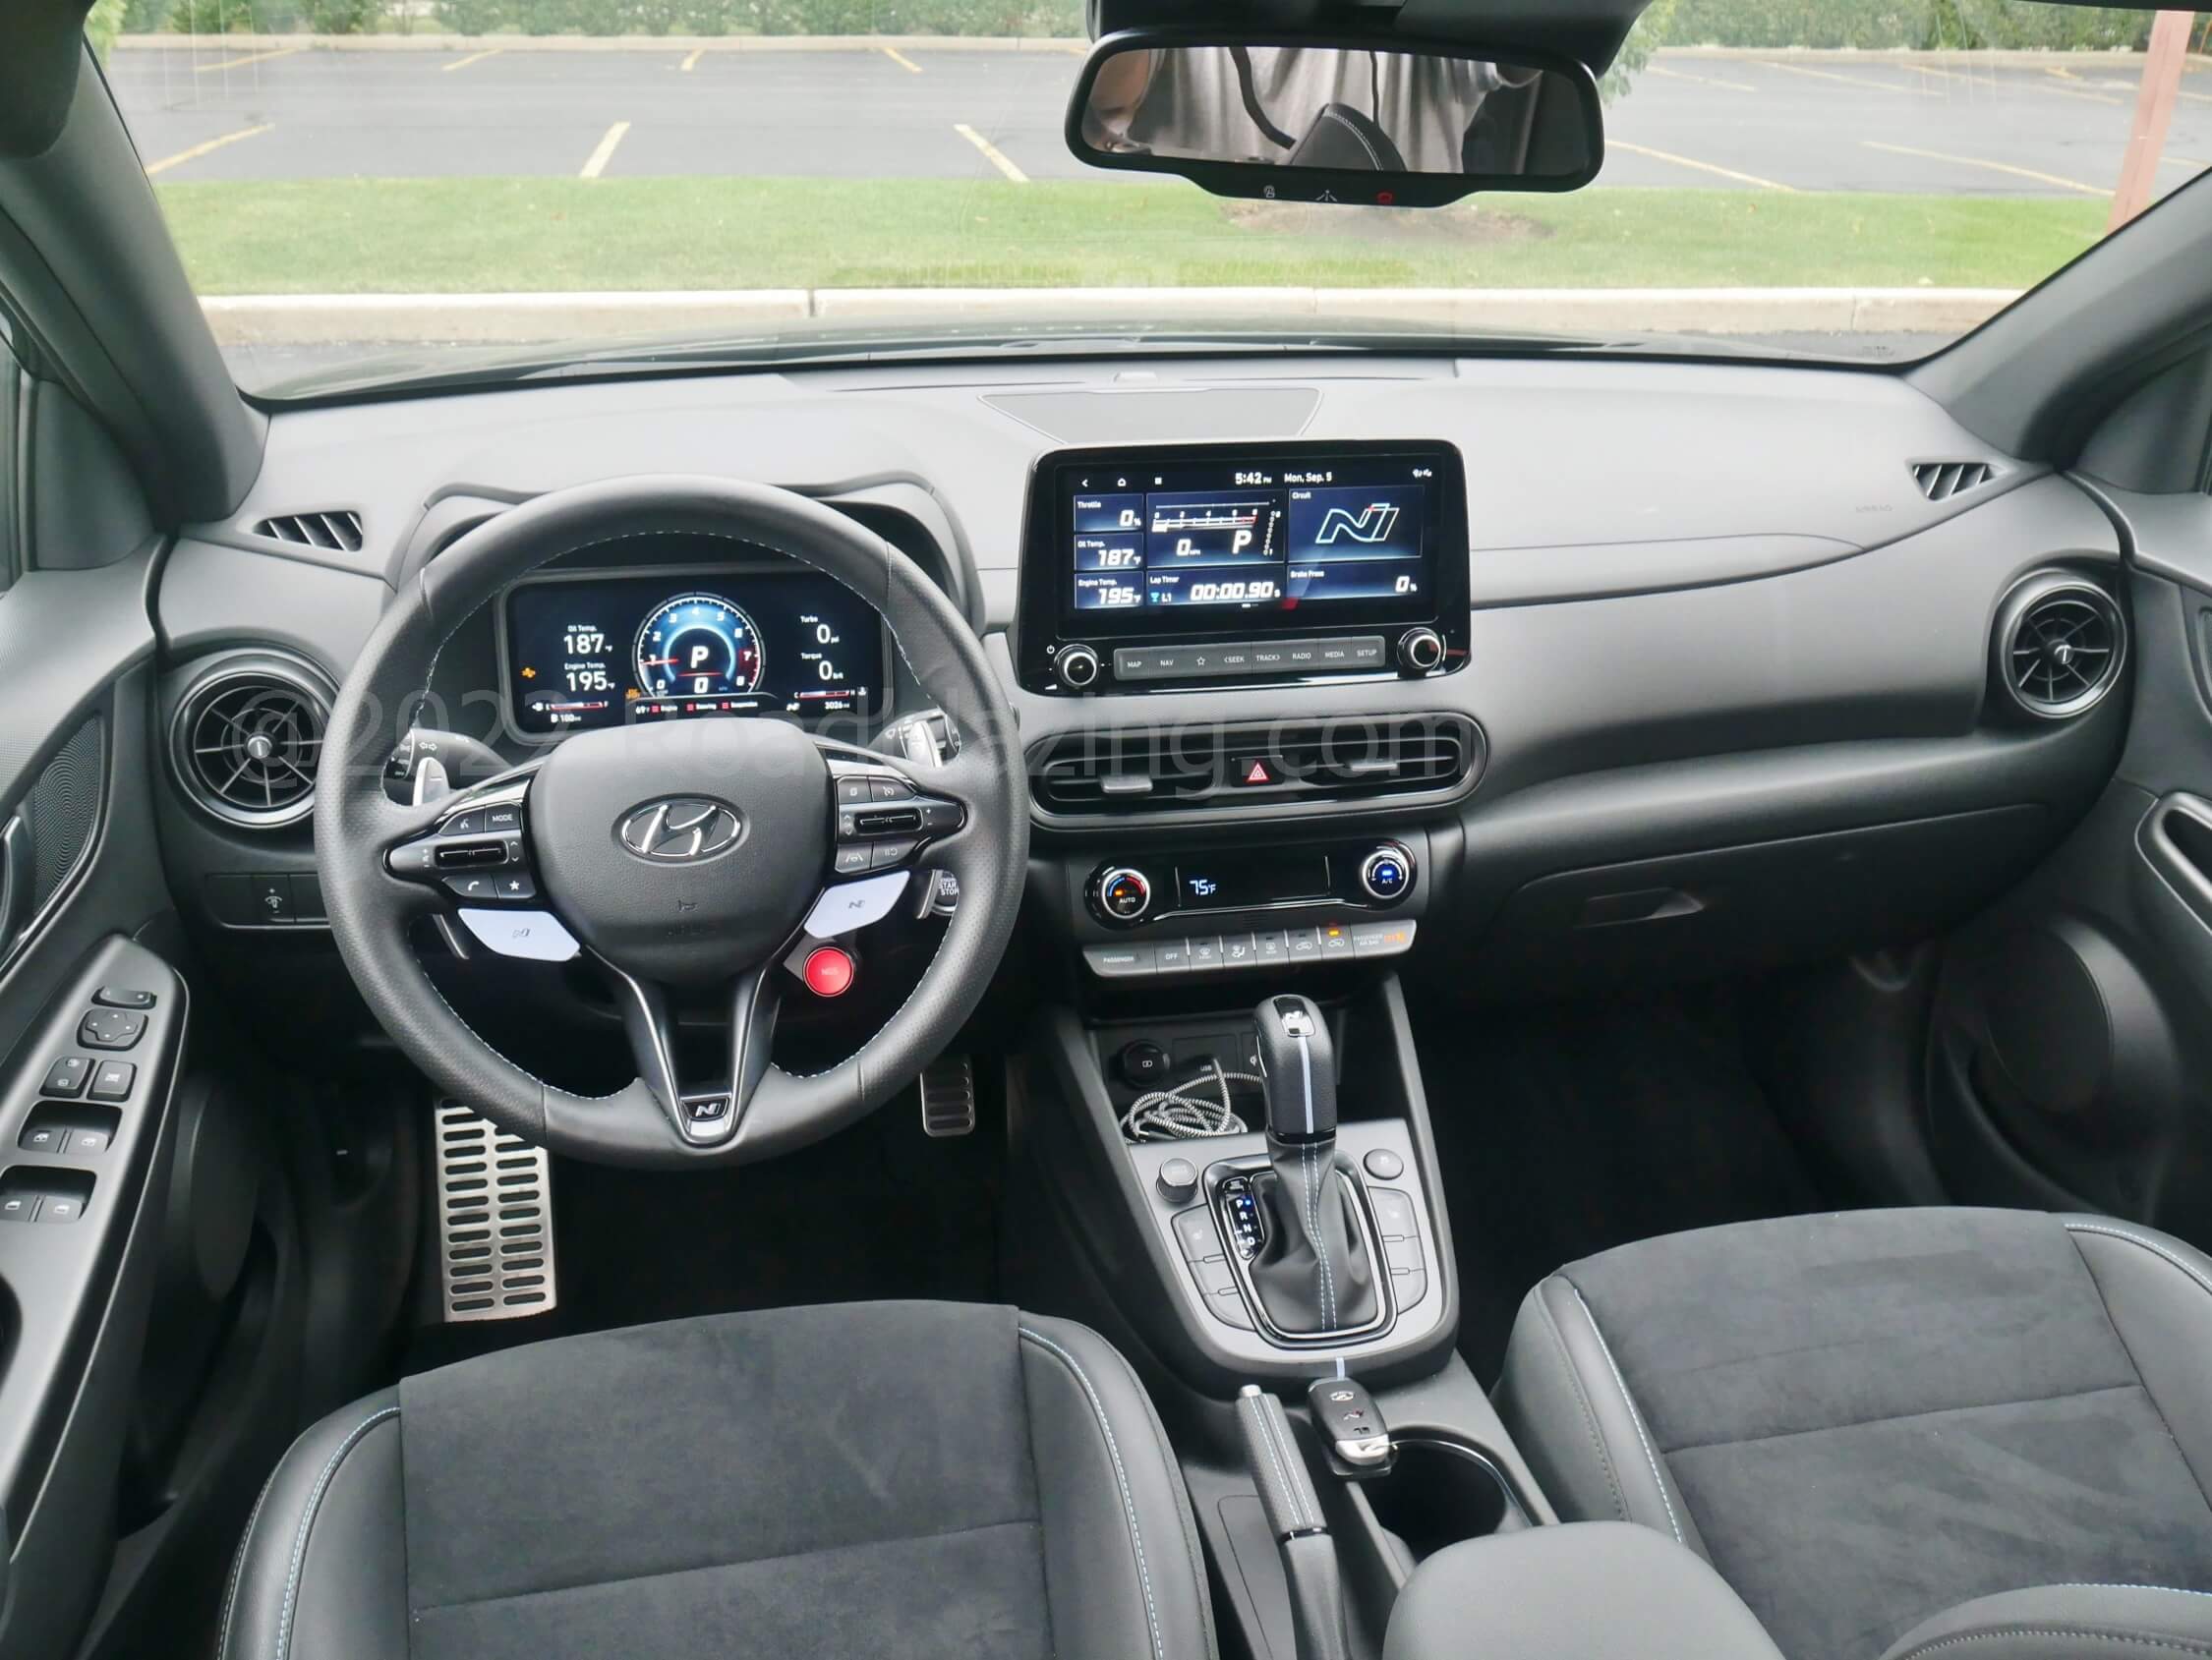 2022 Hyundai Kona DCT: new 10.25" Digital TFT instrument cluster and 10.25" touch LCD infotainment enter cockpit already beset by intuitive controls